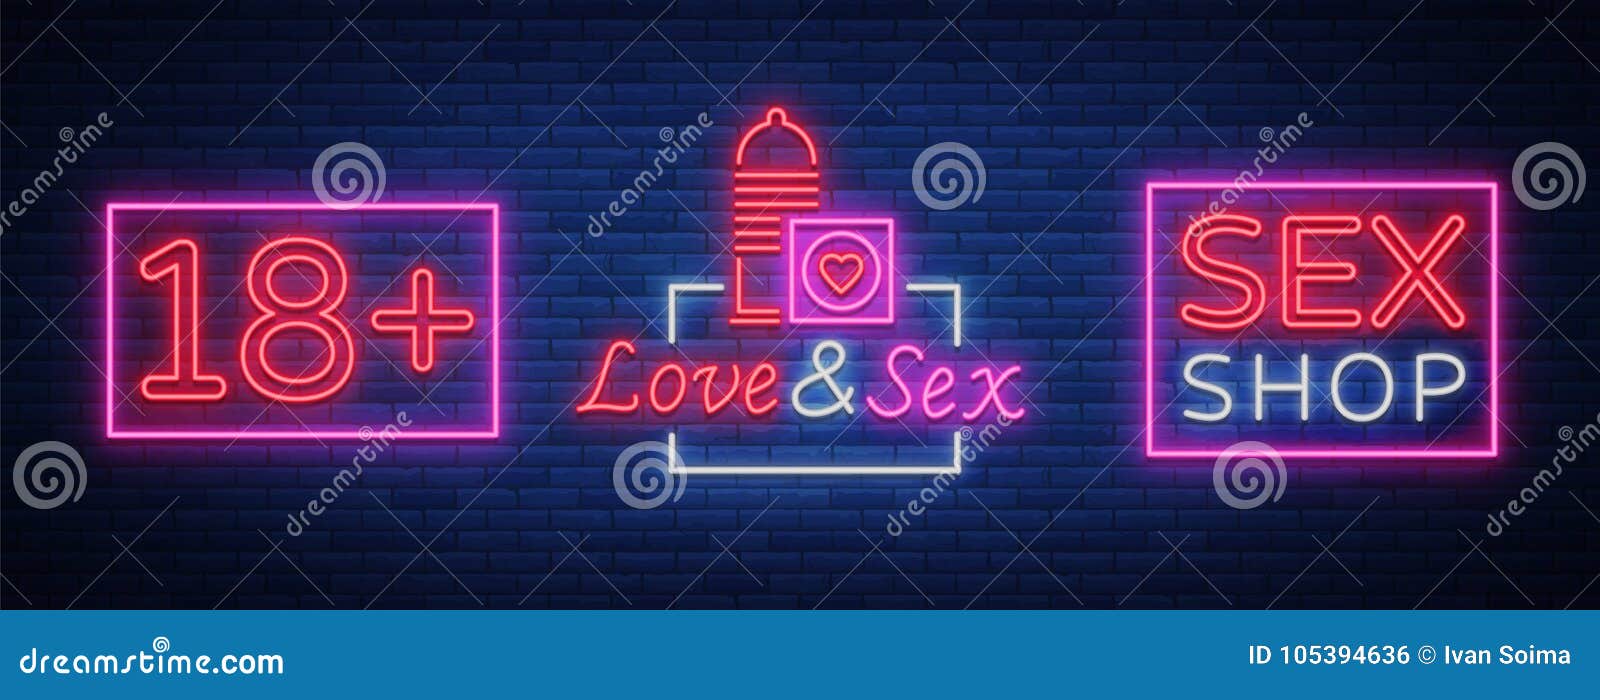 Sex Shop Set Of Logos In Neon Style Collection Of Emblems Neon Effect